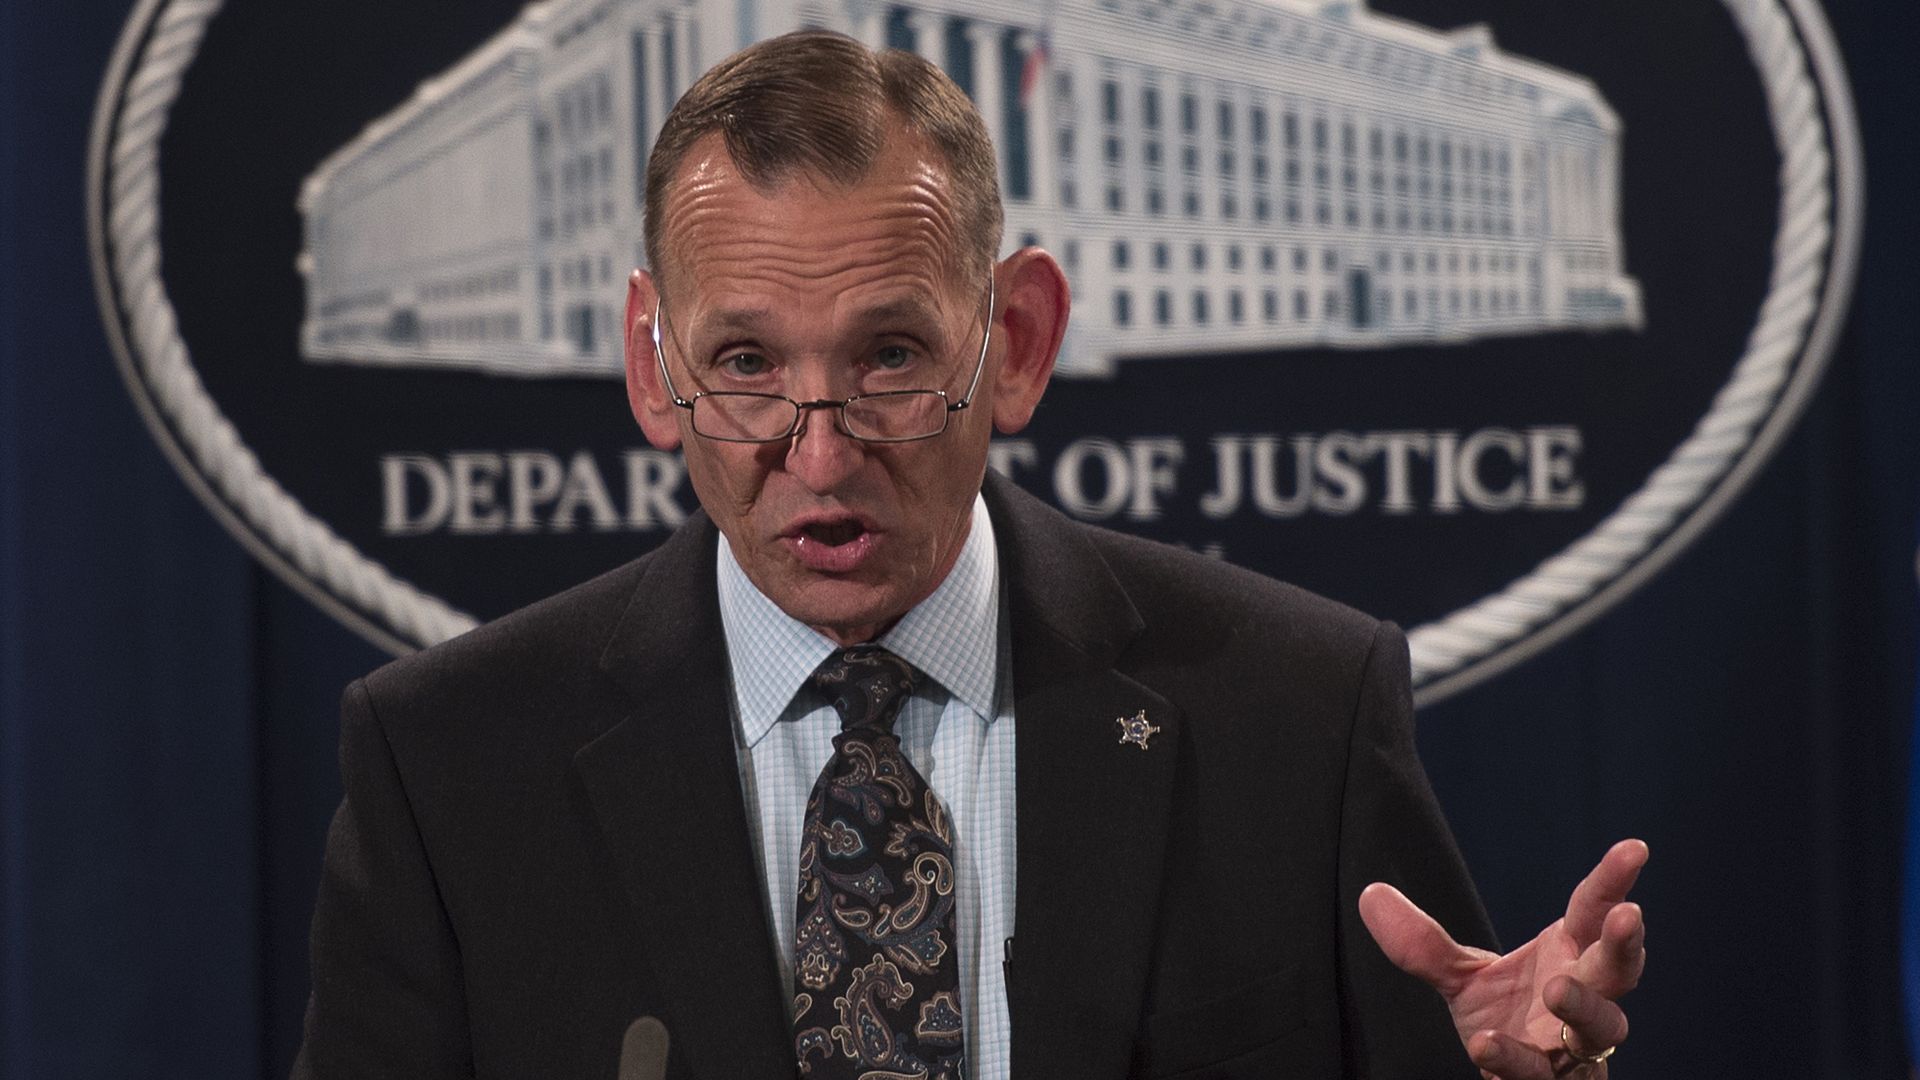 irector of the US Secret Service Randolph Alles speaks during a press conference at the Department of Justice